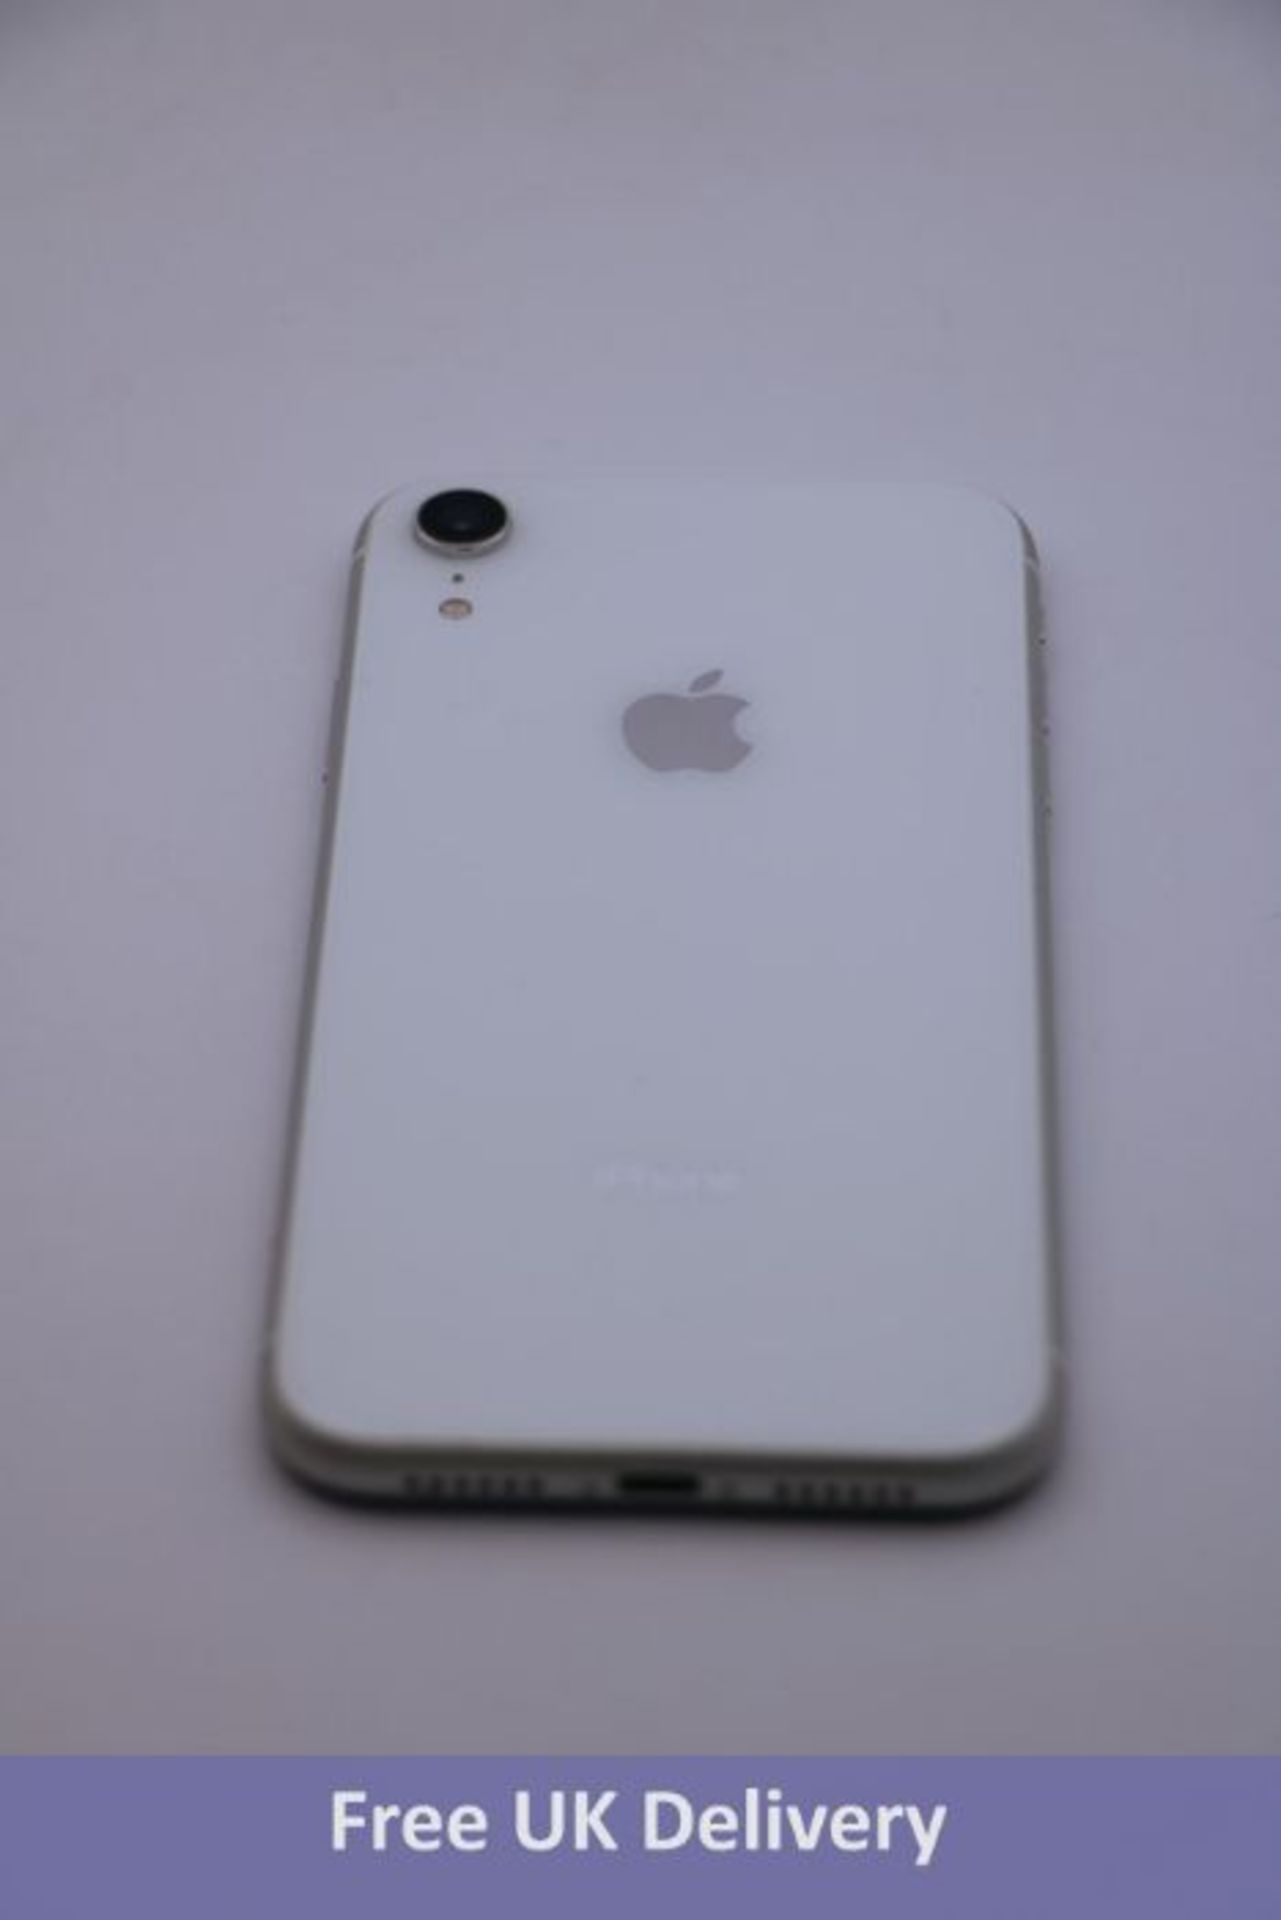 Apple iPhone XR 128GB White, A1984. Used, refurbished, no box or accessories. Checkmend clear, ref. - Image 2 of 2